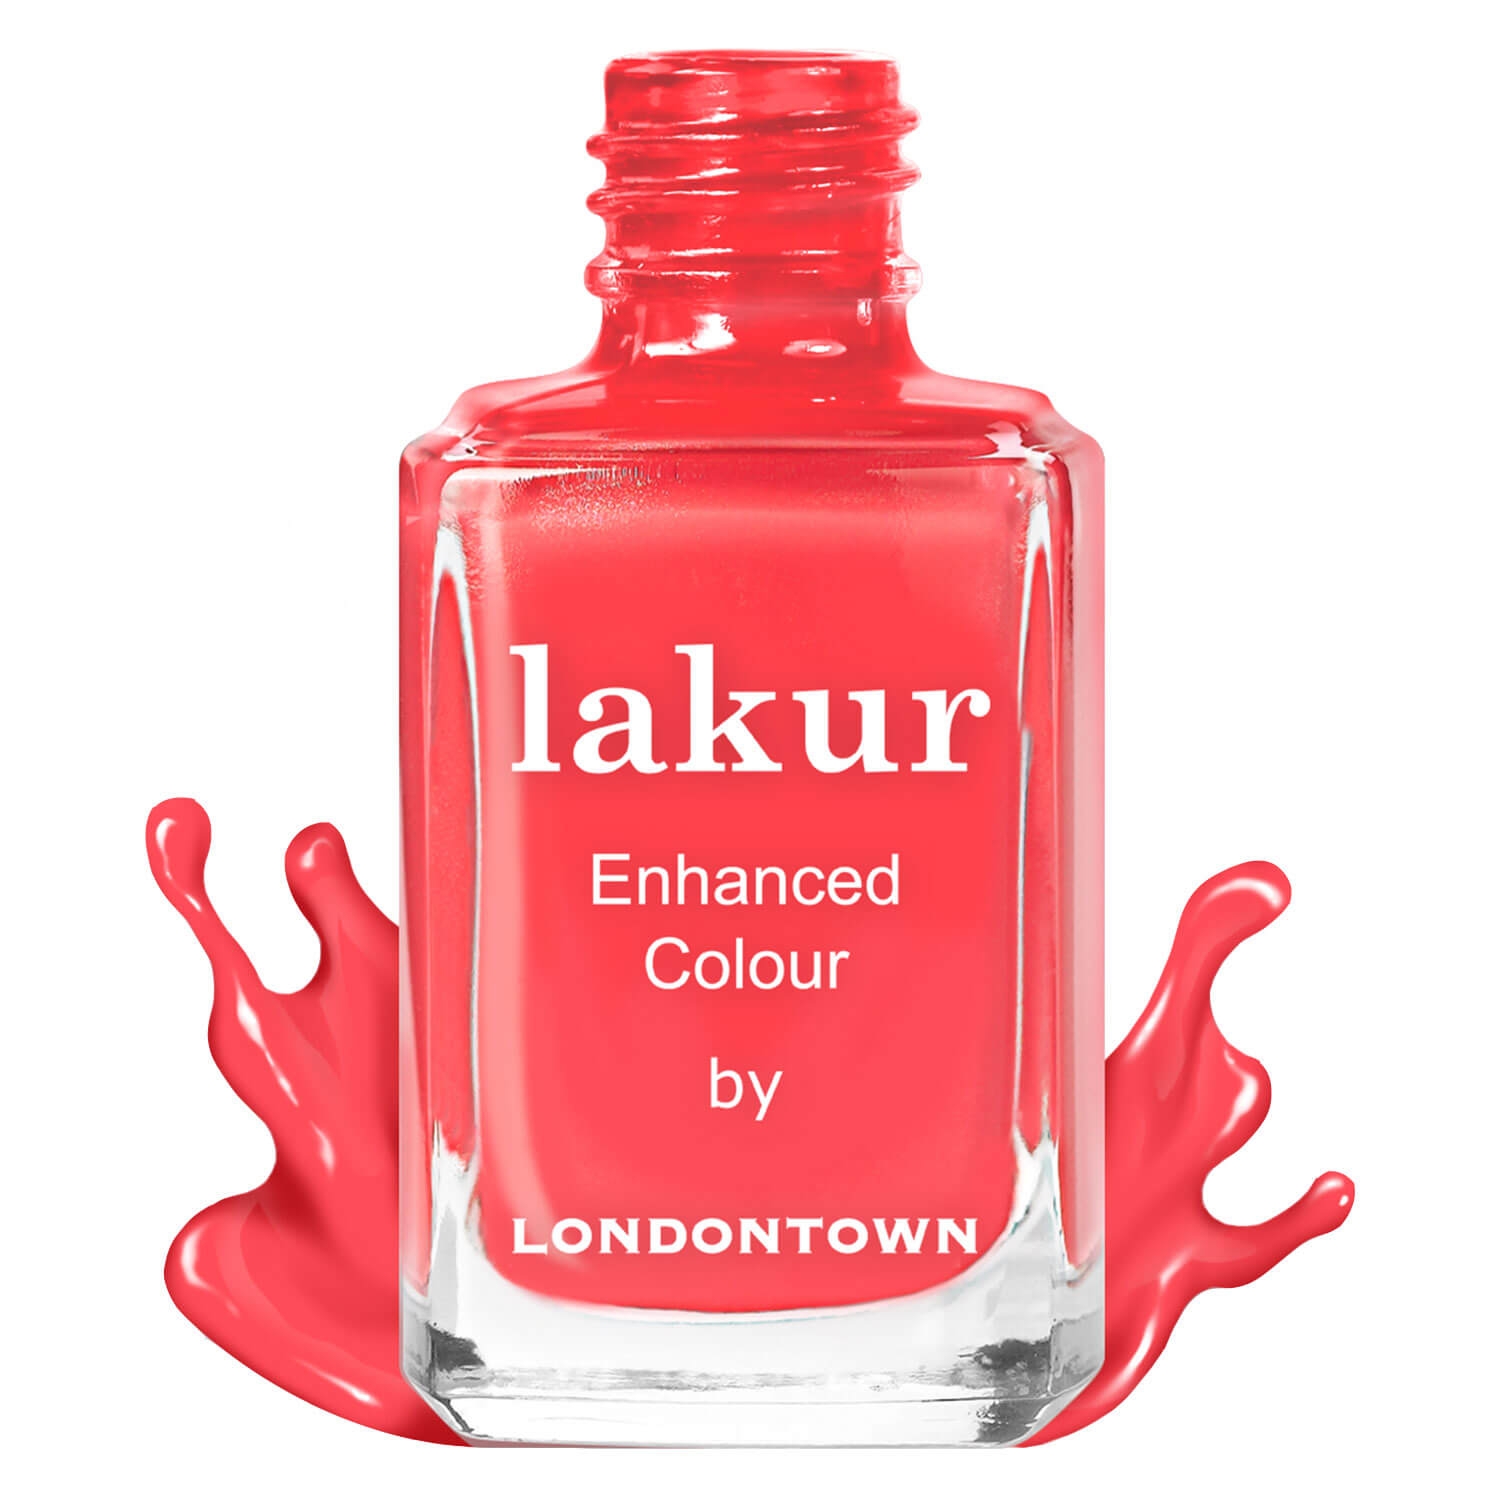 Product image from lakur - Weekend Cheers